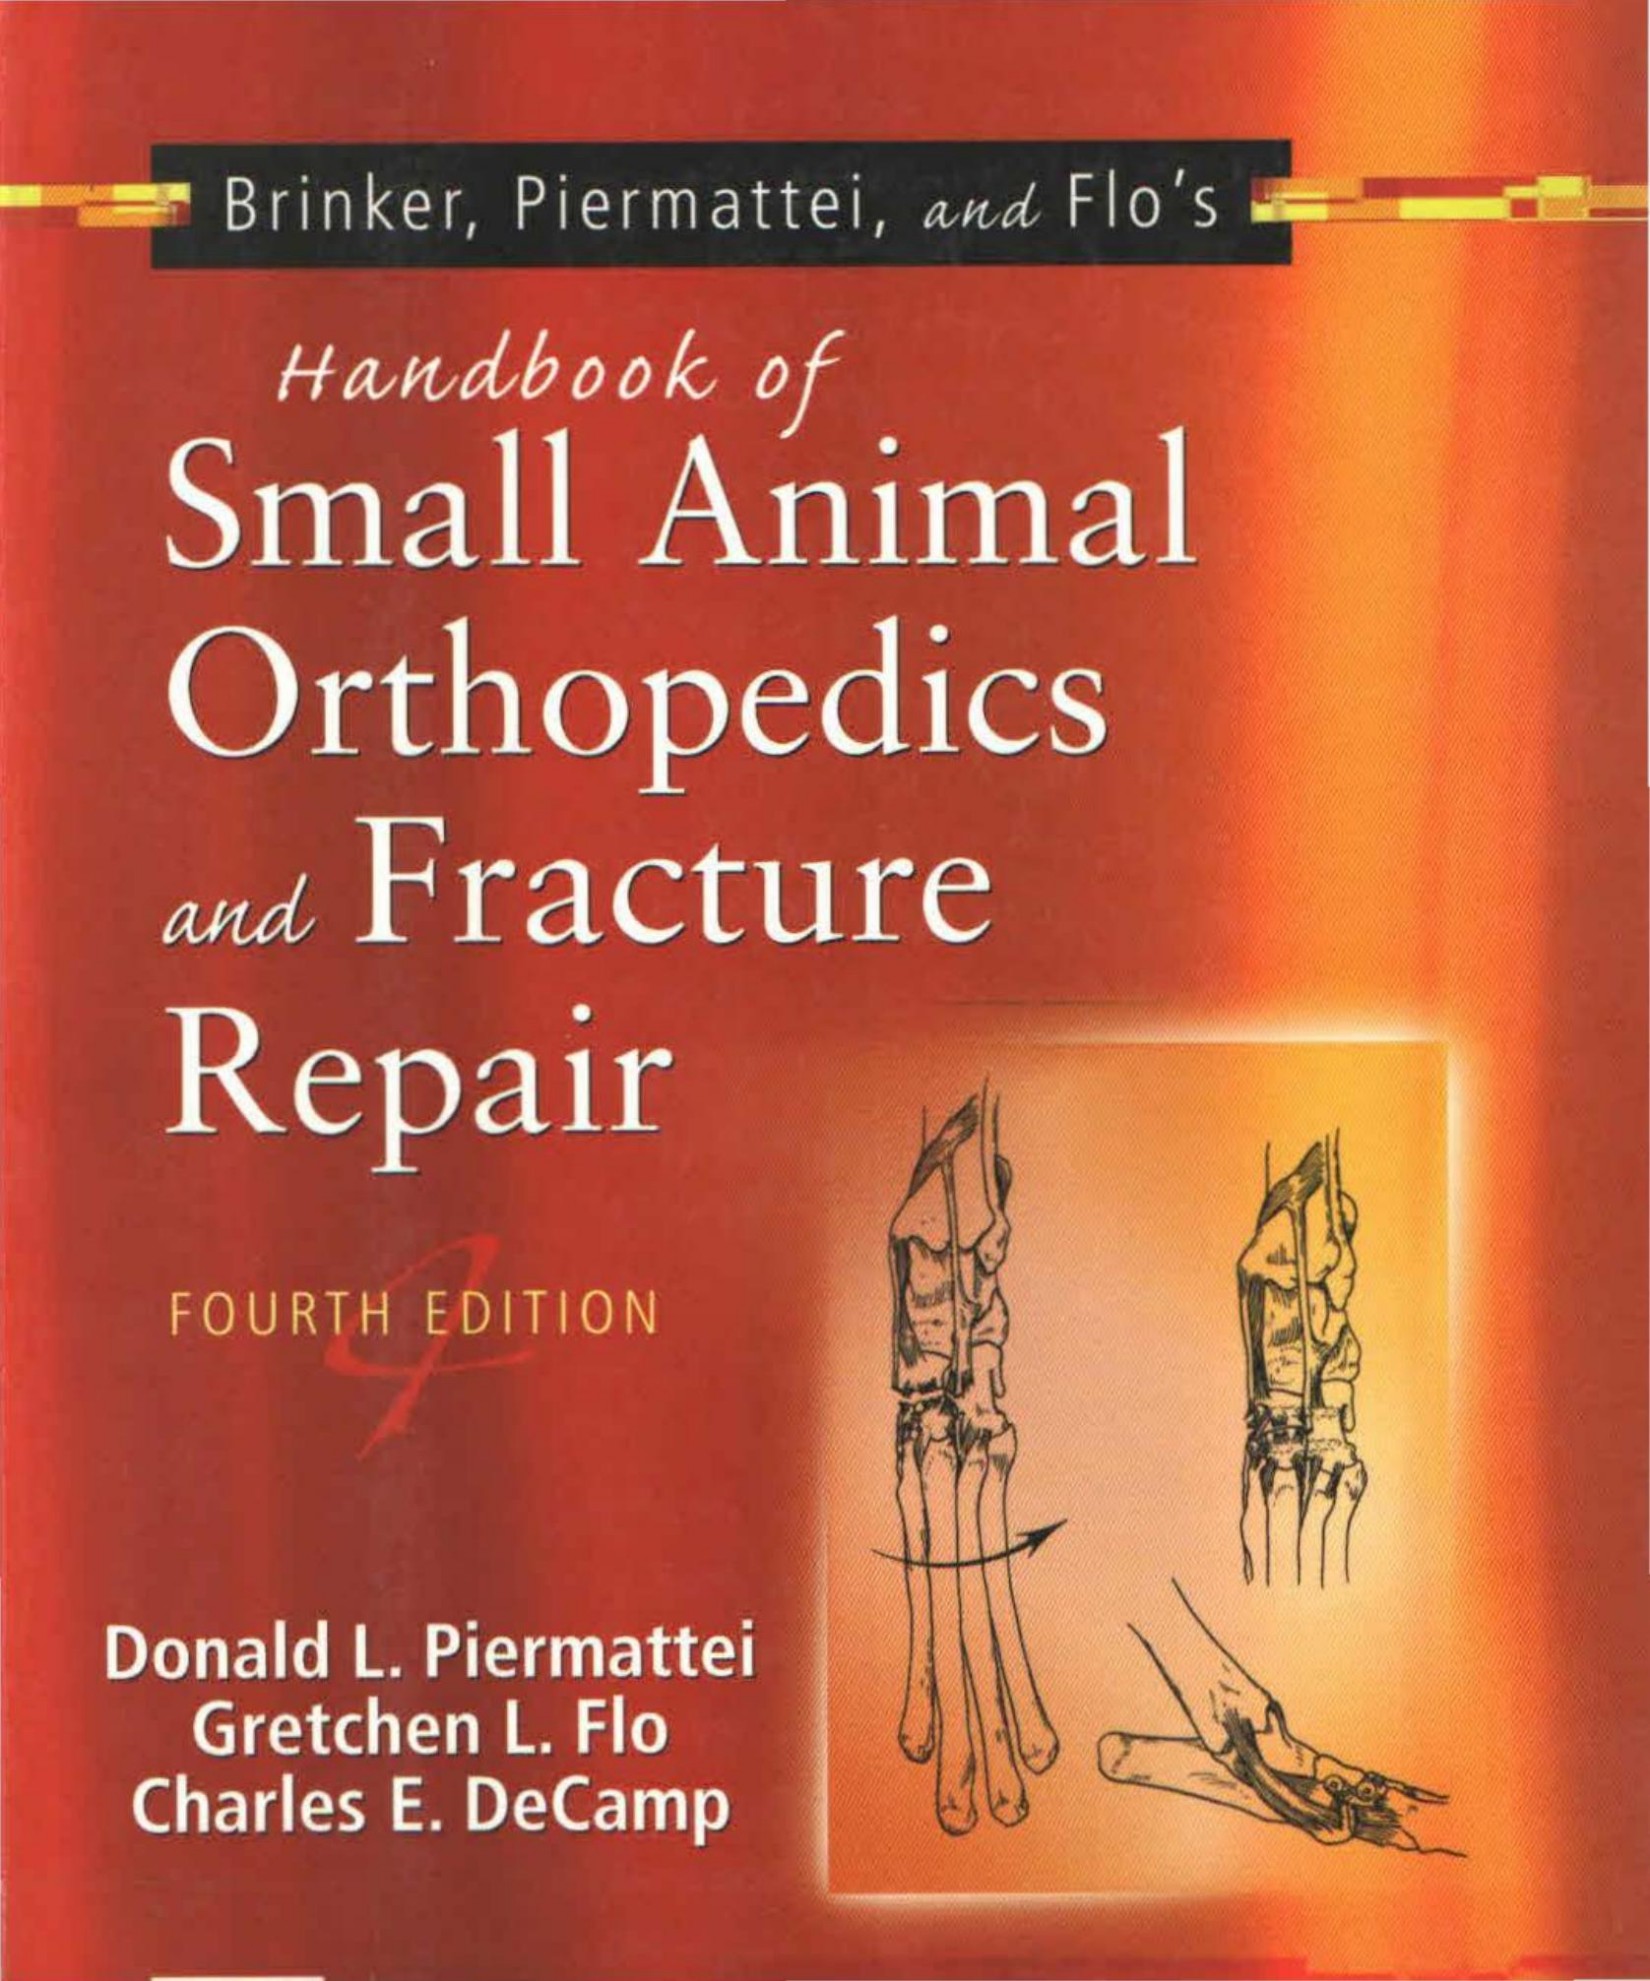 Brinker, Piermattei, and Flo's Handbook of Small Animal Orthopedics and Fracture Repair ((Fourth Edition))